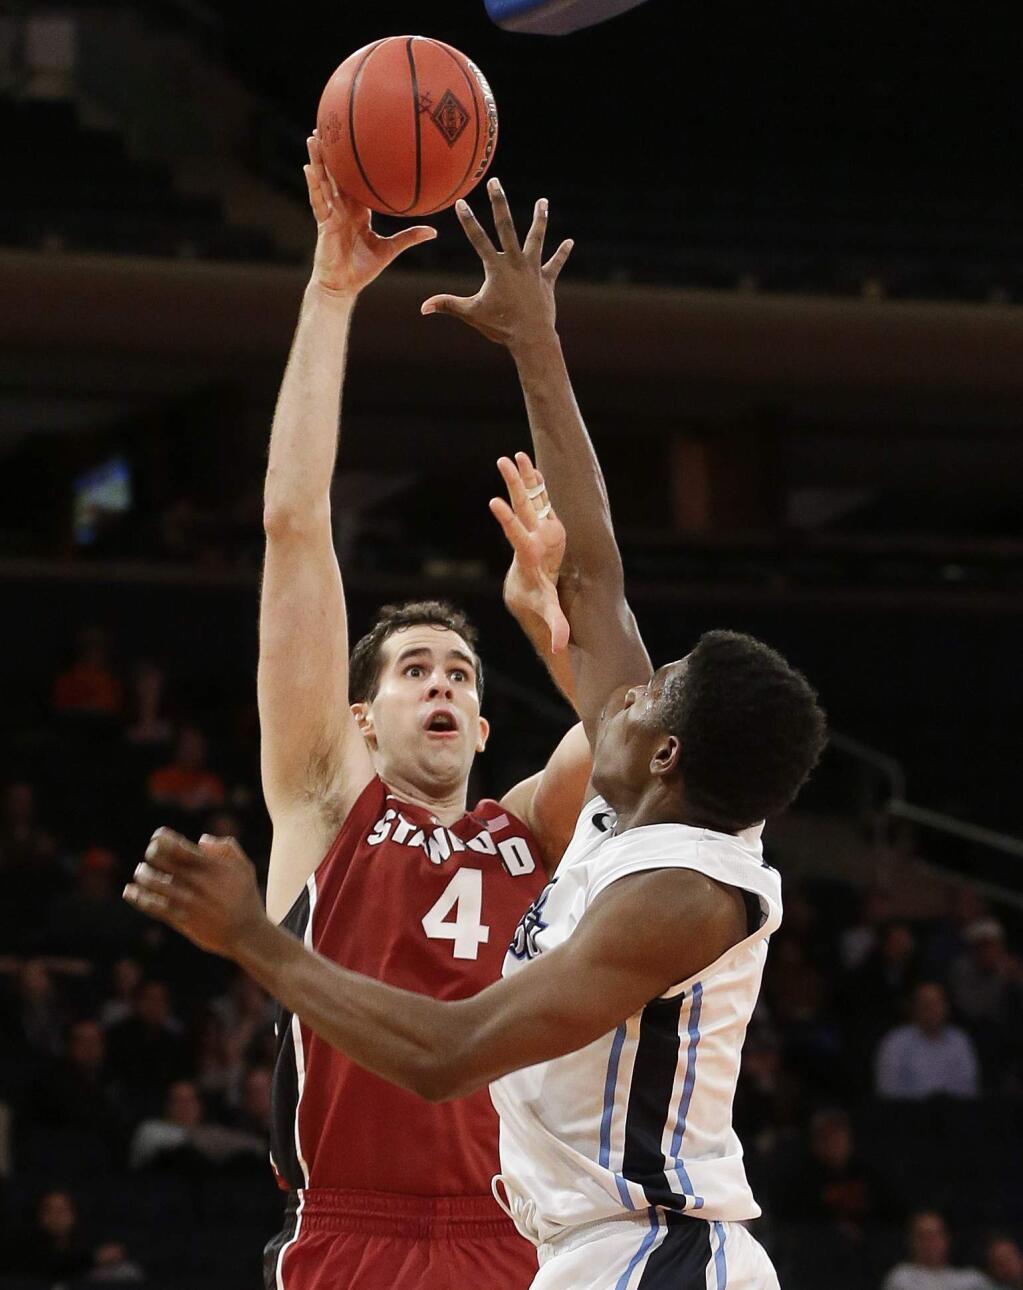 Stanford's Stefan Nastic (4) shoots over Old Dominion's Denzell Taylor (21) during the second half of a semifinal at the NIT college basketball tournament Tuesday, March 31, 2015, in New York. Stanford won 67-60. (AP Photo/Frank Franklin II)